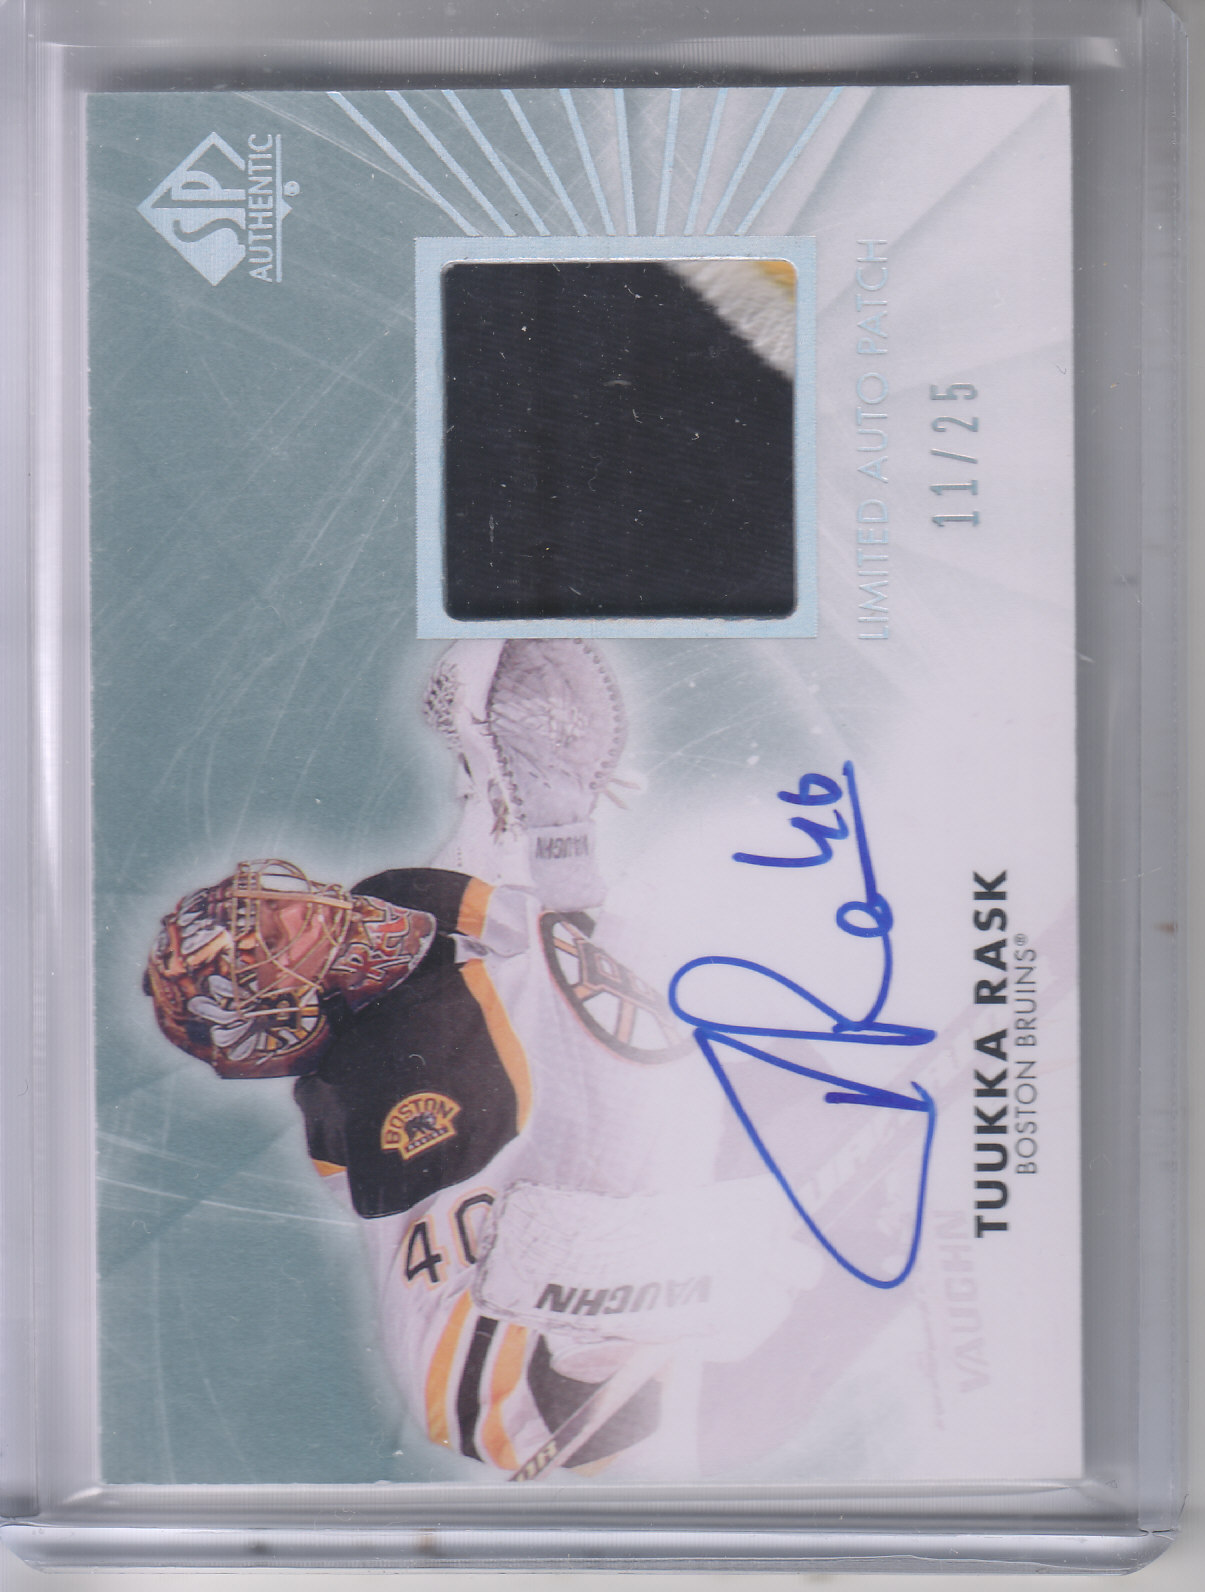 2011-12 SP Authentic Limited Patches #20 Tuukka Rask AU/25/(inserted in 2012-13 SP Authentic)